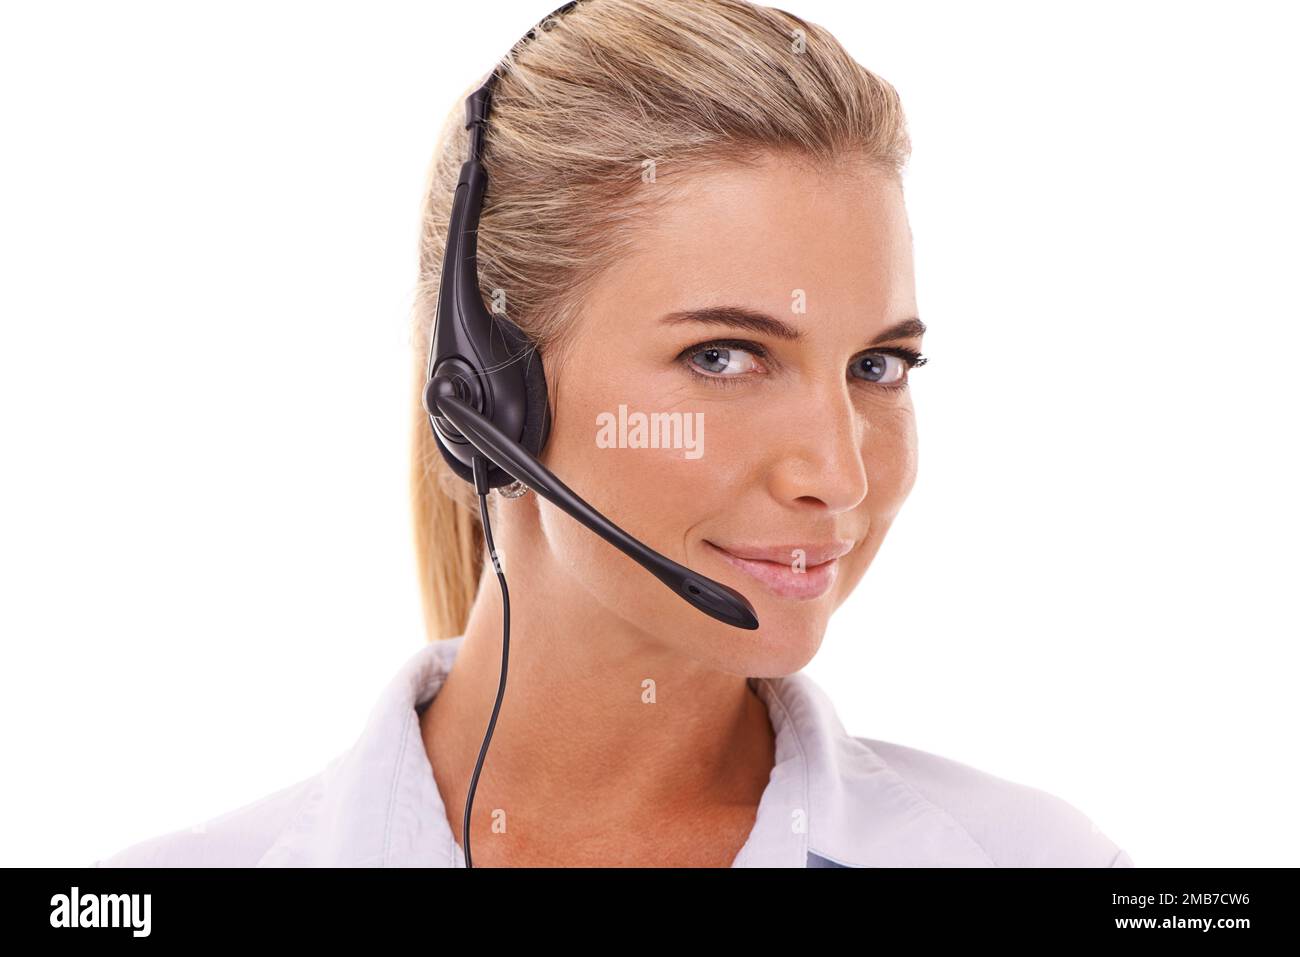 Customer support communication, face portrait and woman talk on contact us CRM, telemarketing or call center. Telecom microphone, customer service and Stock Photo